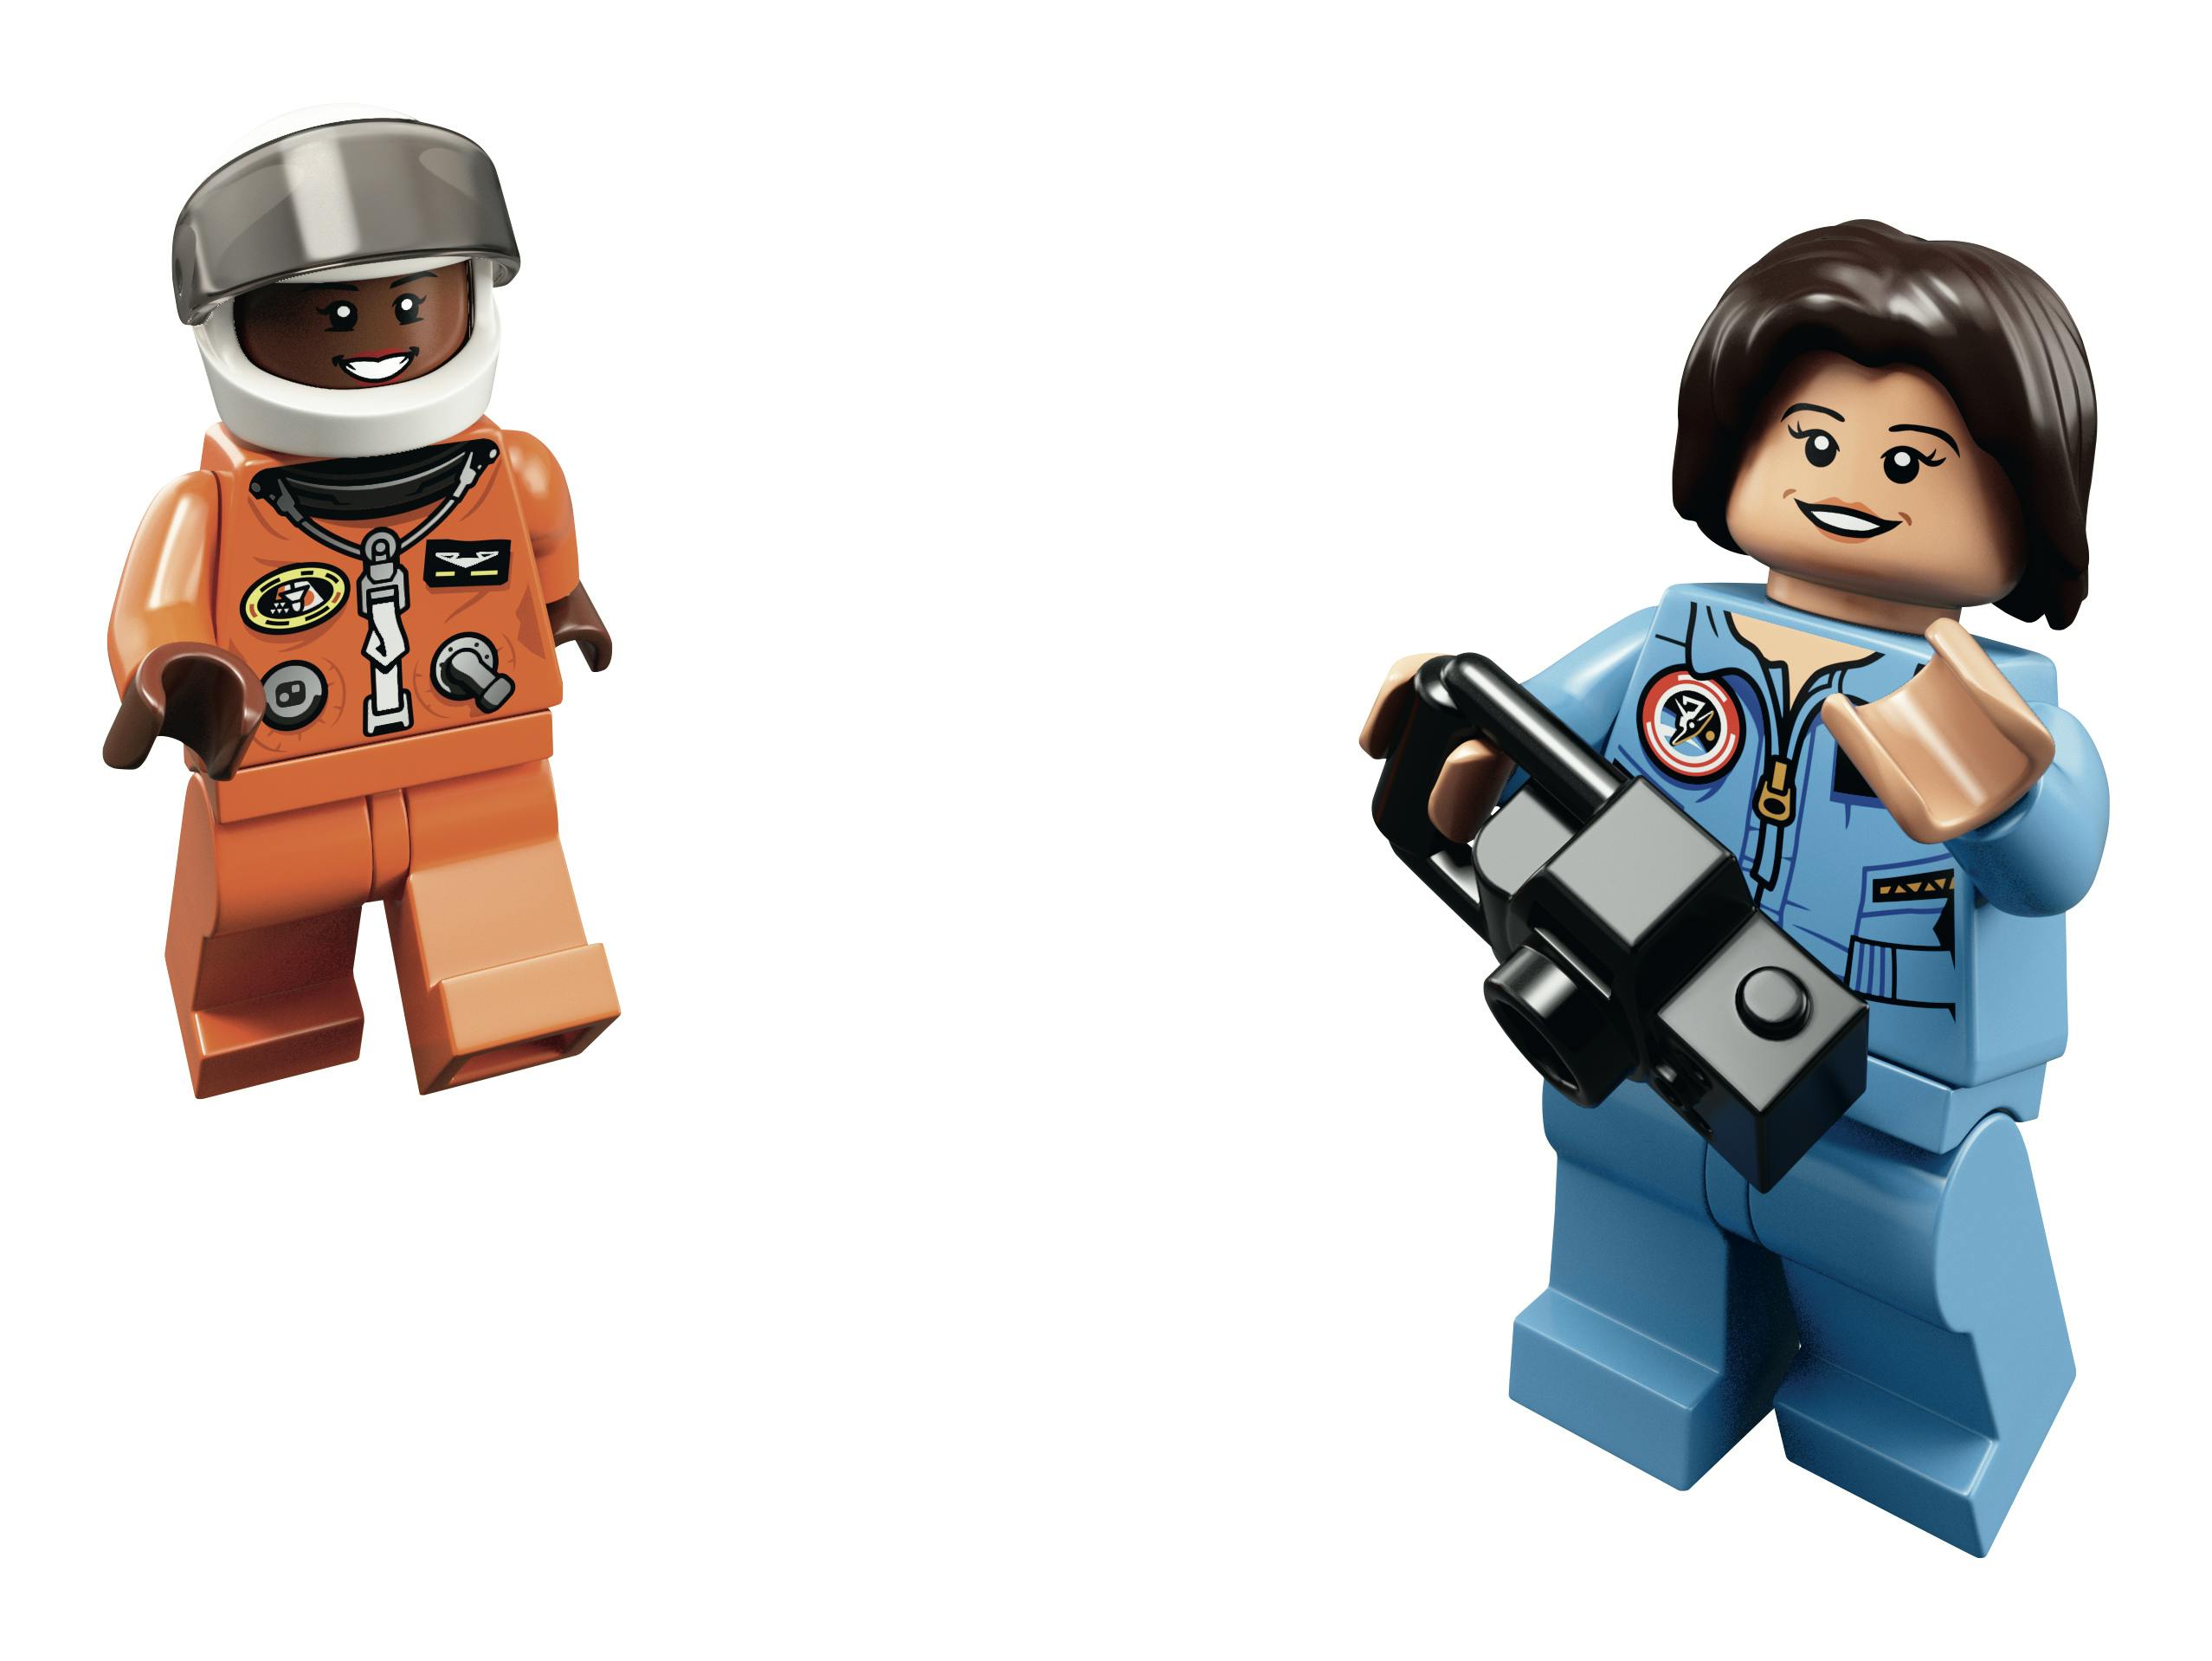 Figurines of pioneering women of STEM hits shelves next month.